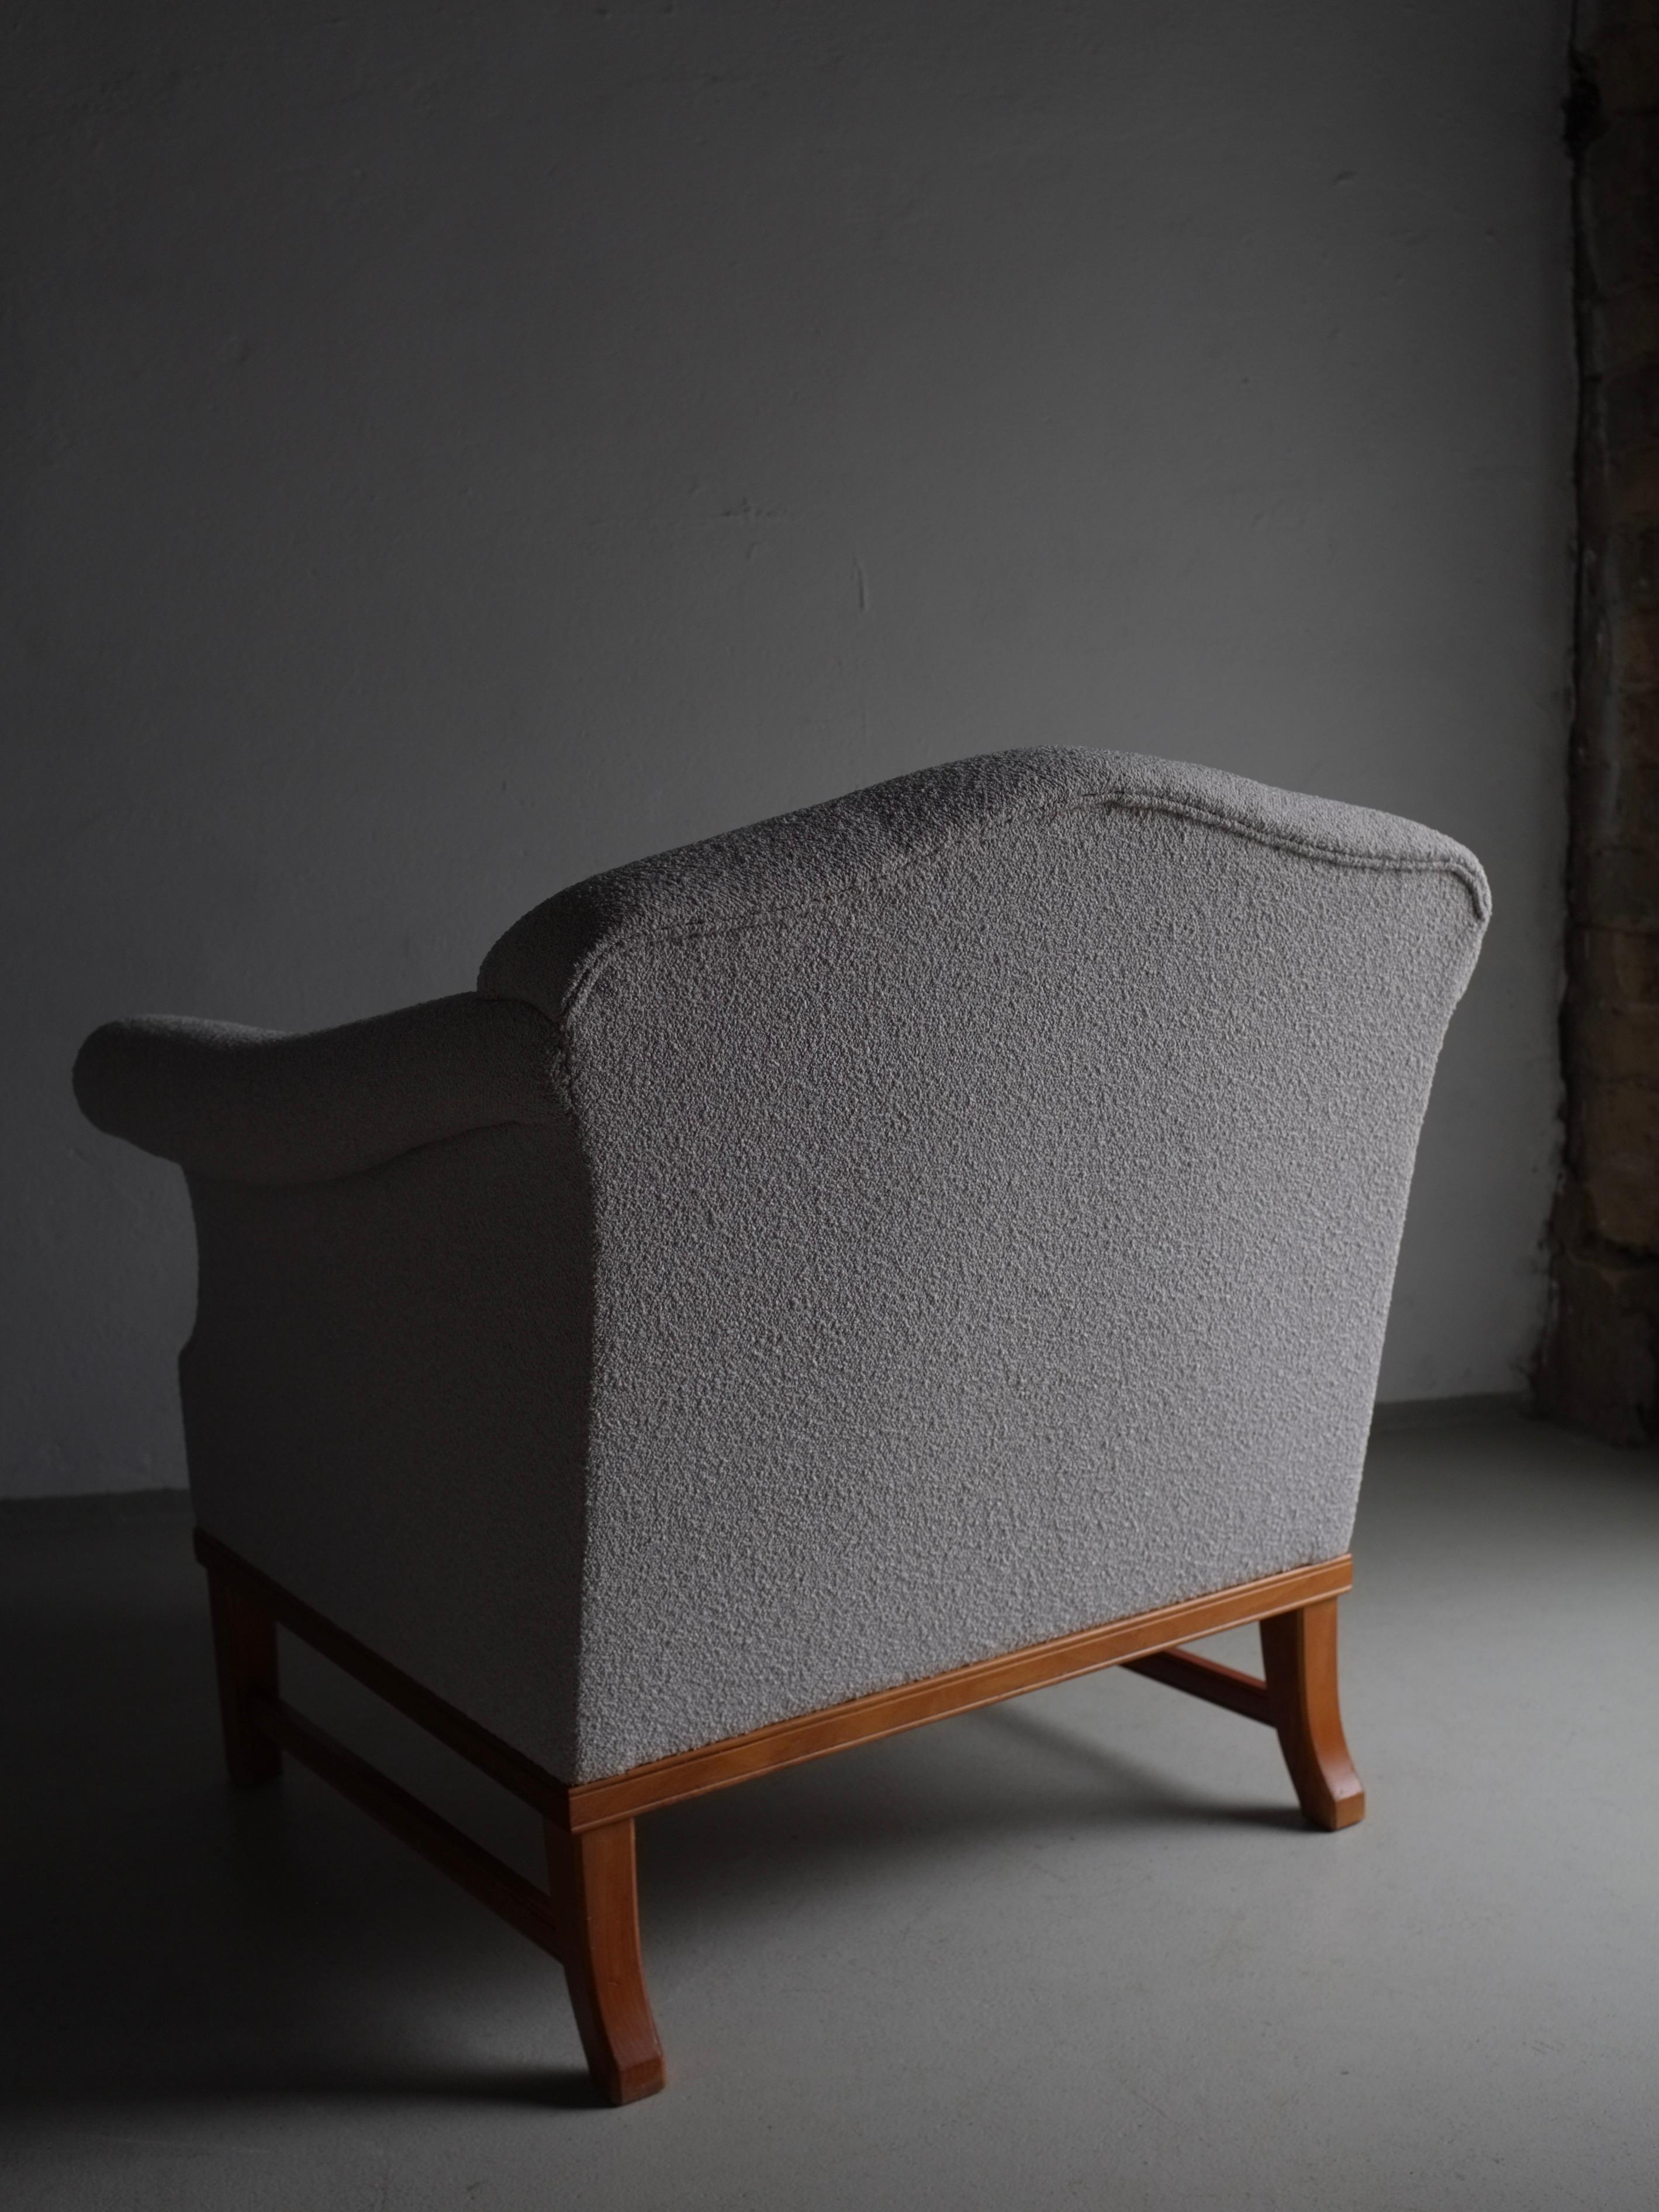 Wood Gray Boucle Lounge Chair, Sweden 1940s For Sale